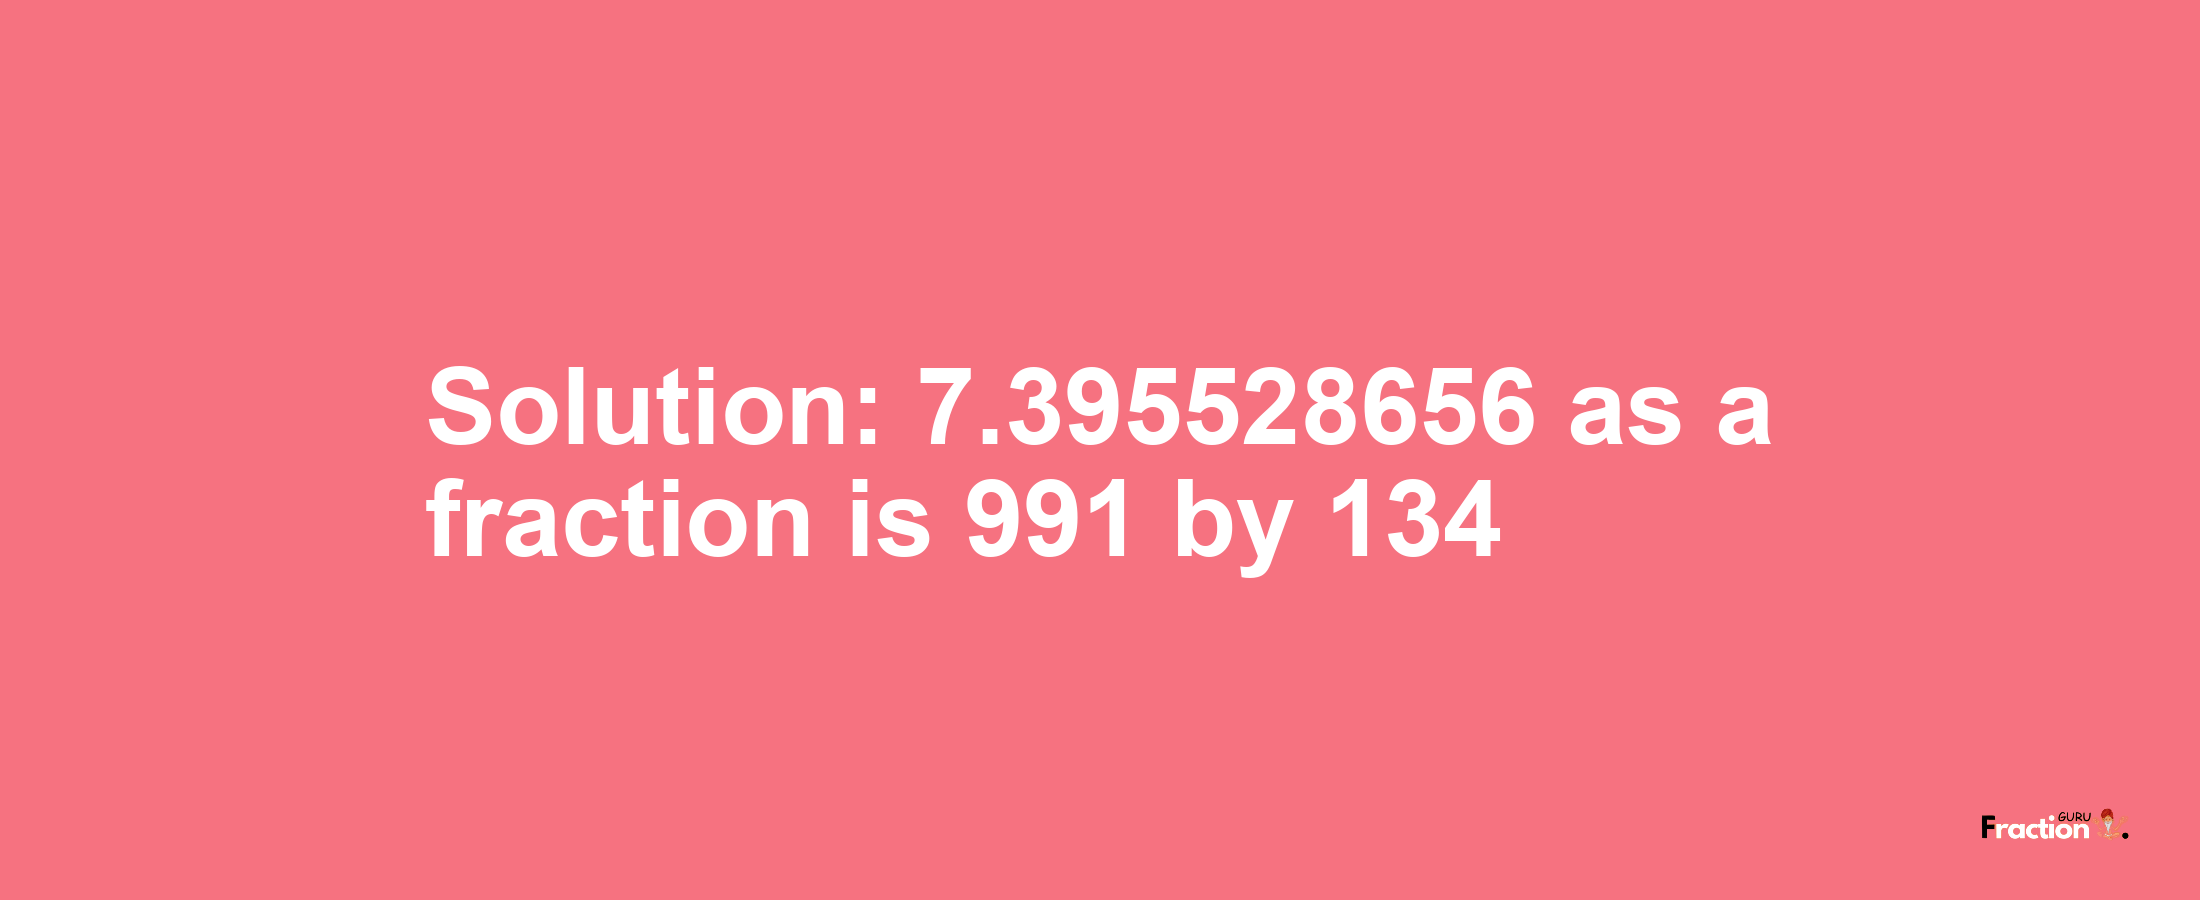 Solution:7.395528656 as a fraction is 991/134